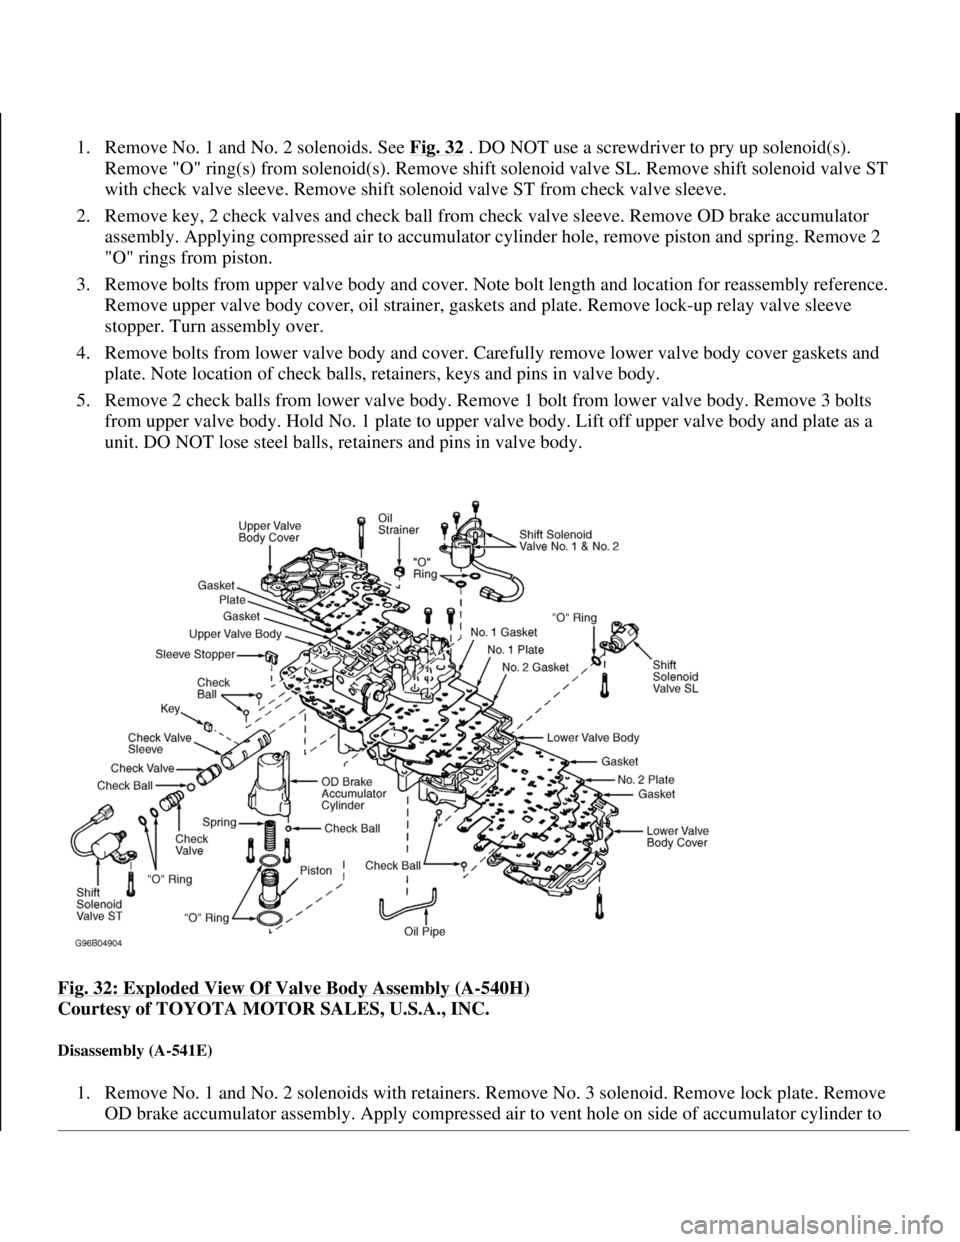 TOYOTA RAV4 1996  Service Repair Manual 1. Remove No. 1 and No. 2 solenoids. See Fig. 32 . DO NOT use a screwdriver to pry up solenoid(s). 
Remove "O" ring(s) from solenoid(s). Remove shift solenoid valve SL. Remove shift solenoid valve ST 